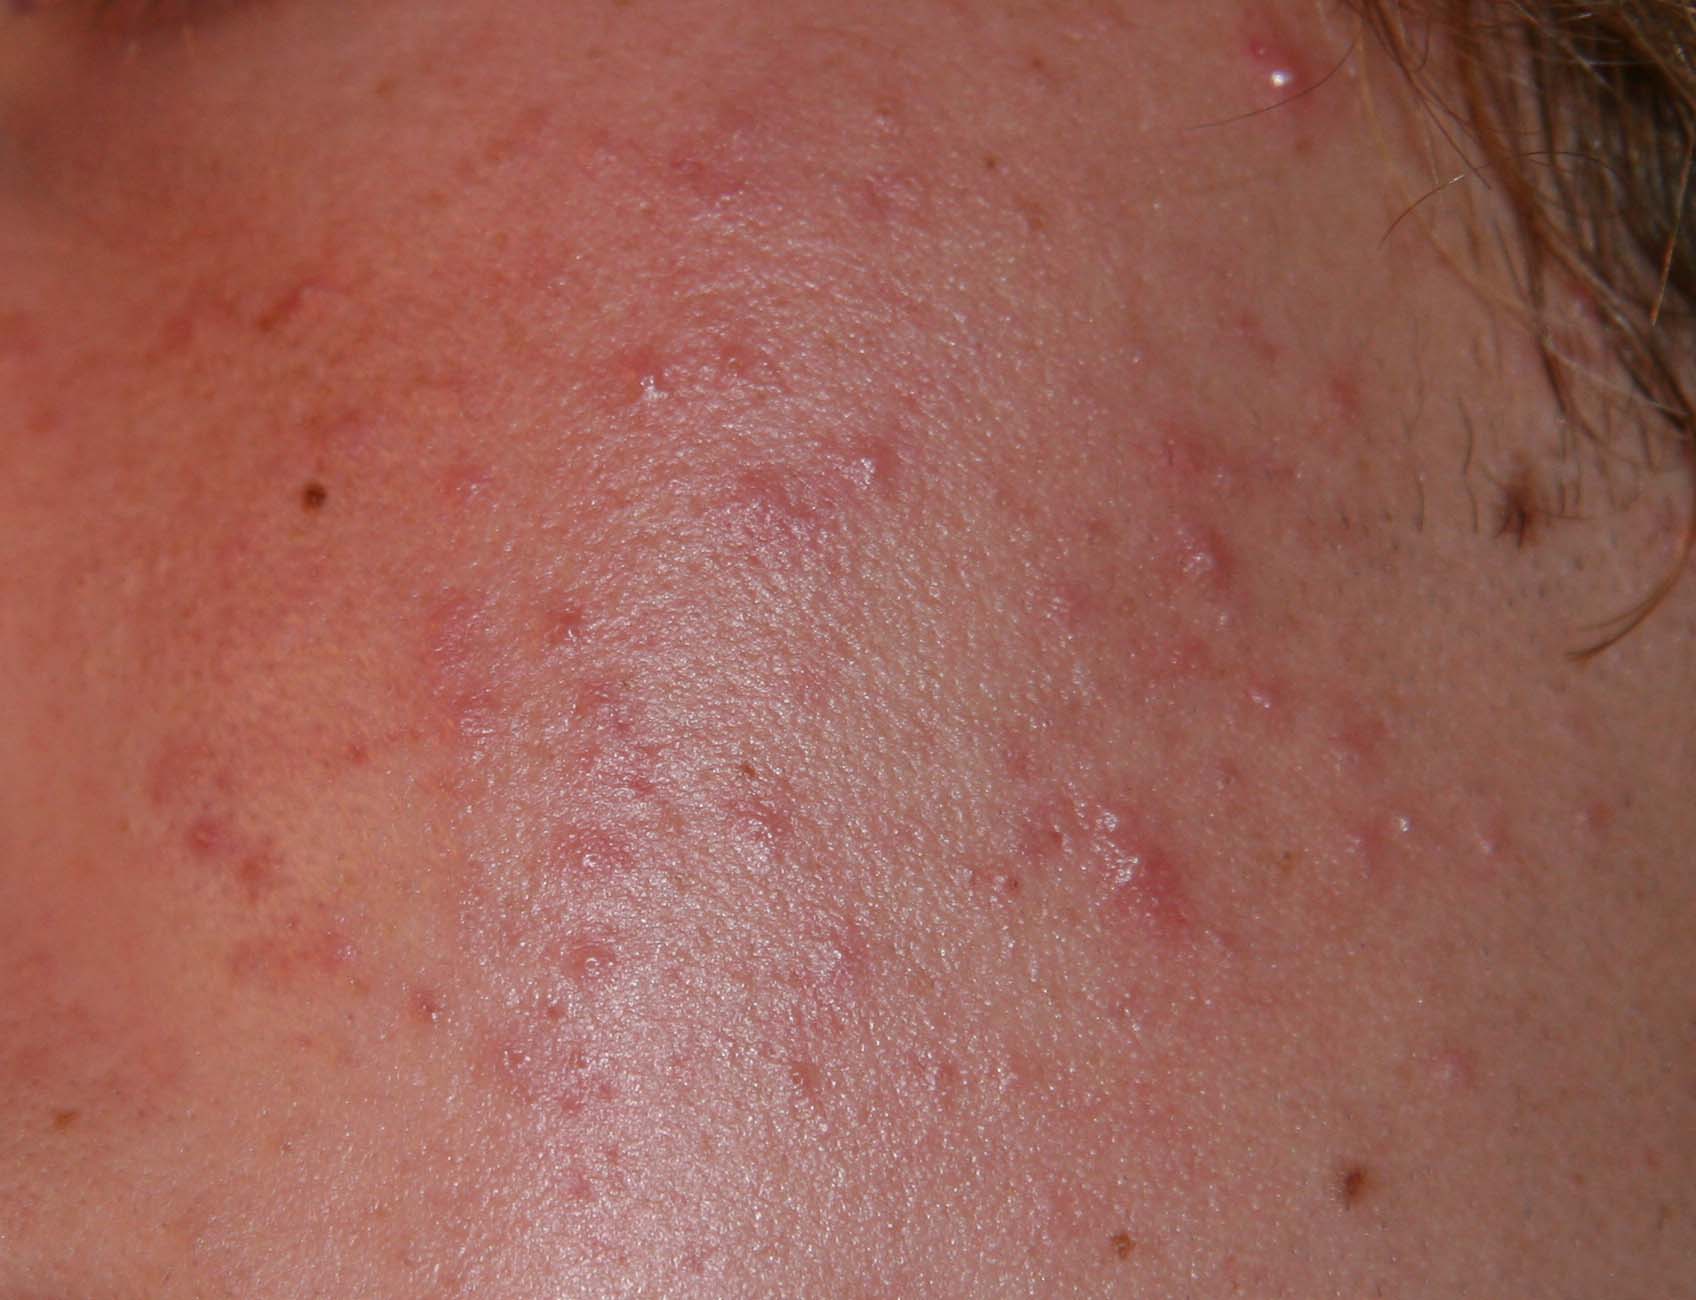 Are little red bumps red marks or pimples? - The Acne.org Regimen ...